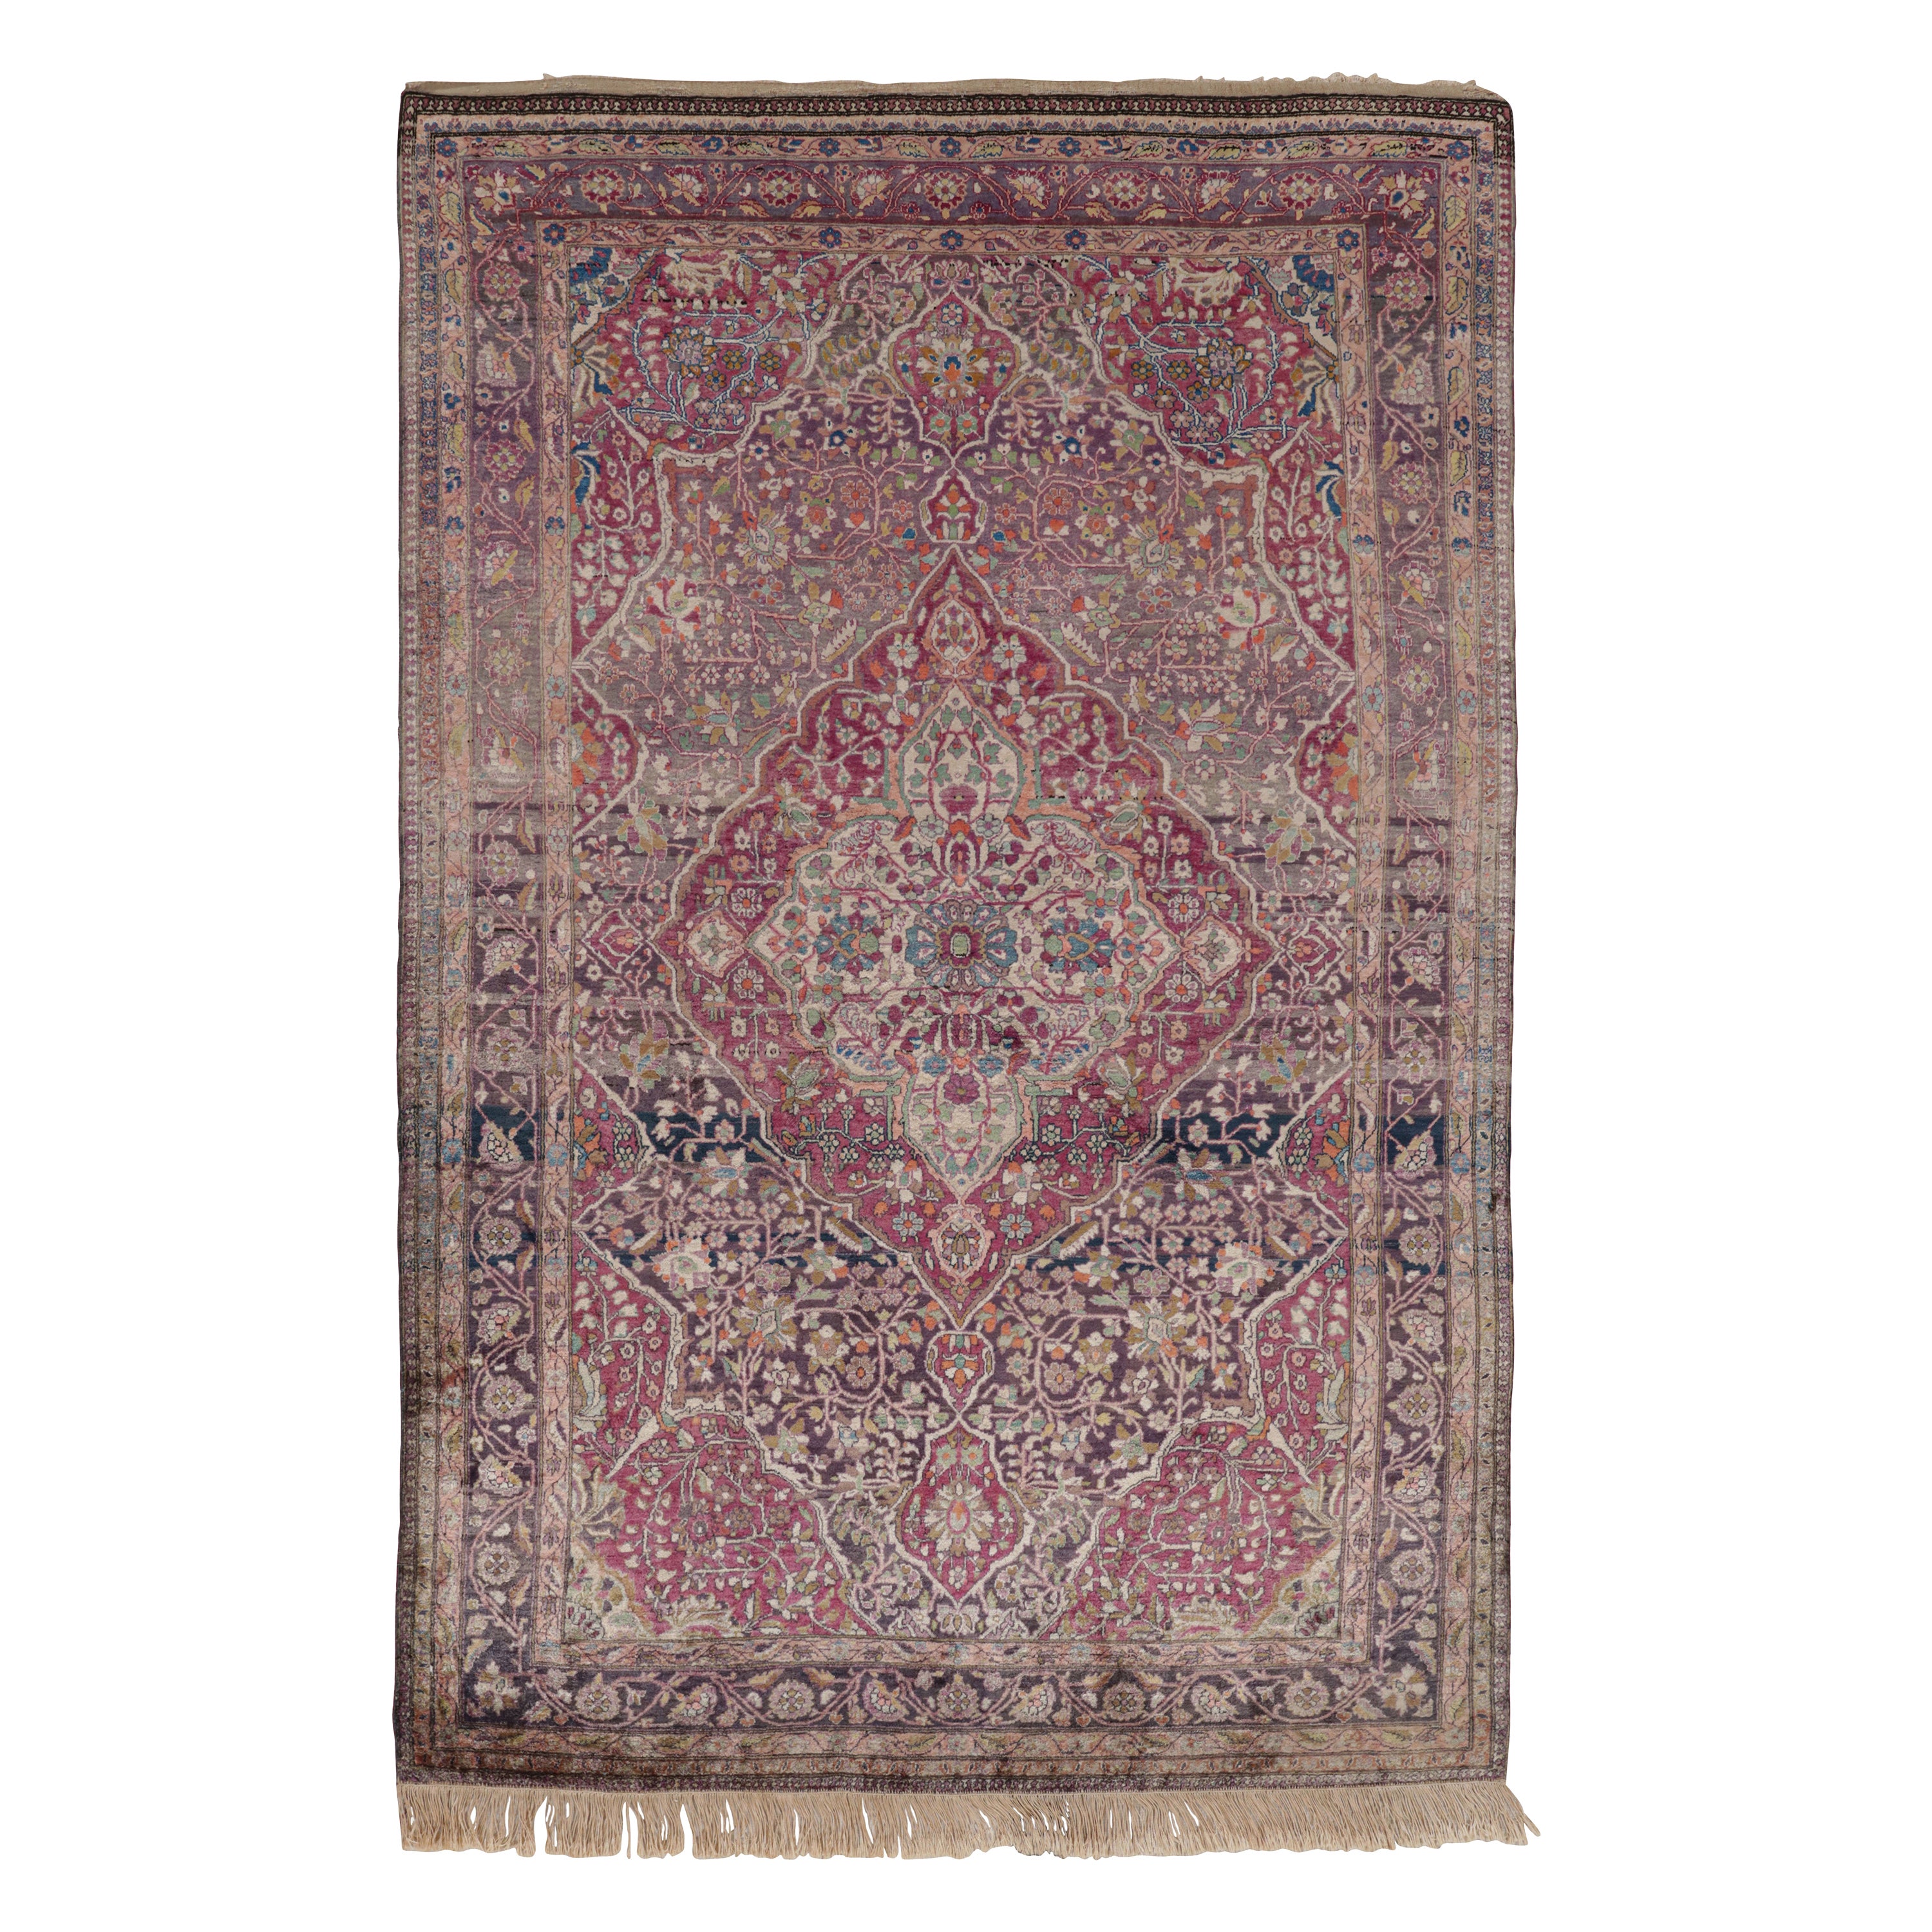 Antique Persian Kashan Rug with Medallion and Floral Patterns, from Rug & Kilim For Sale